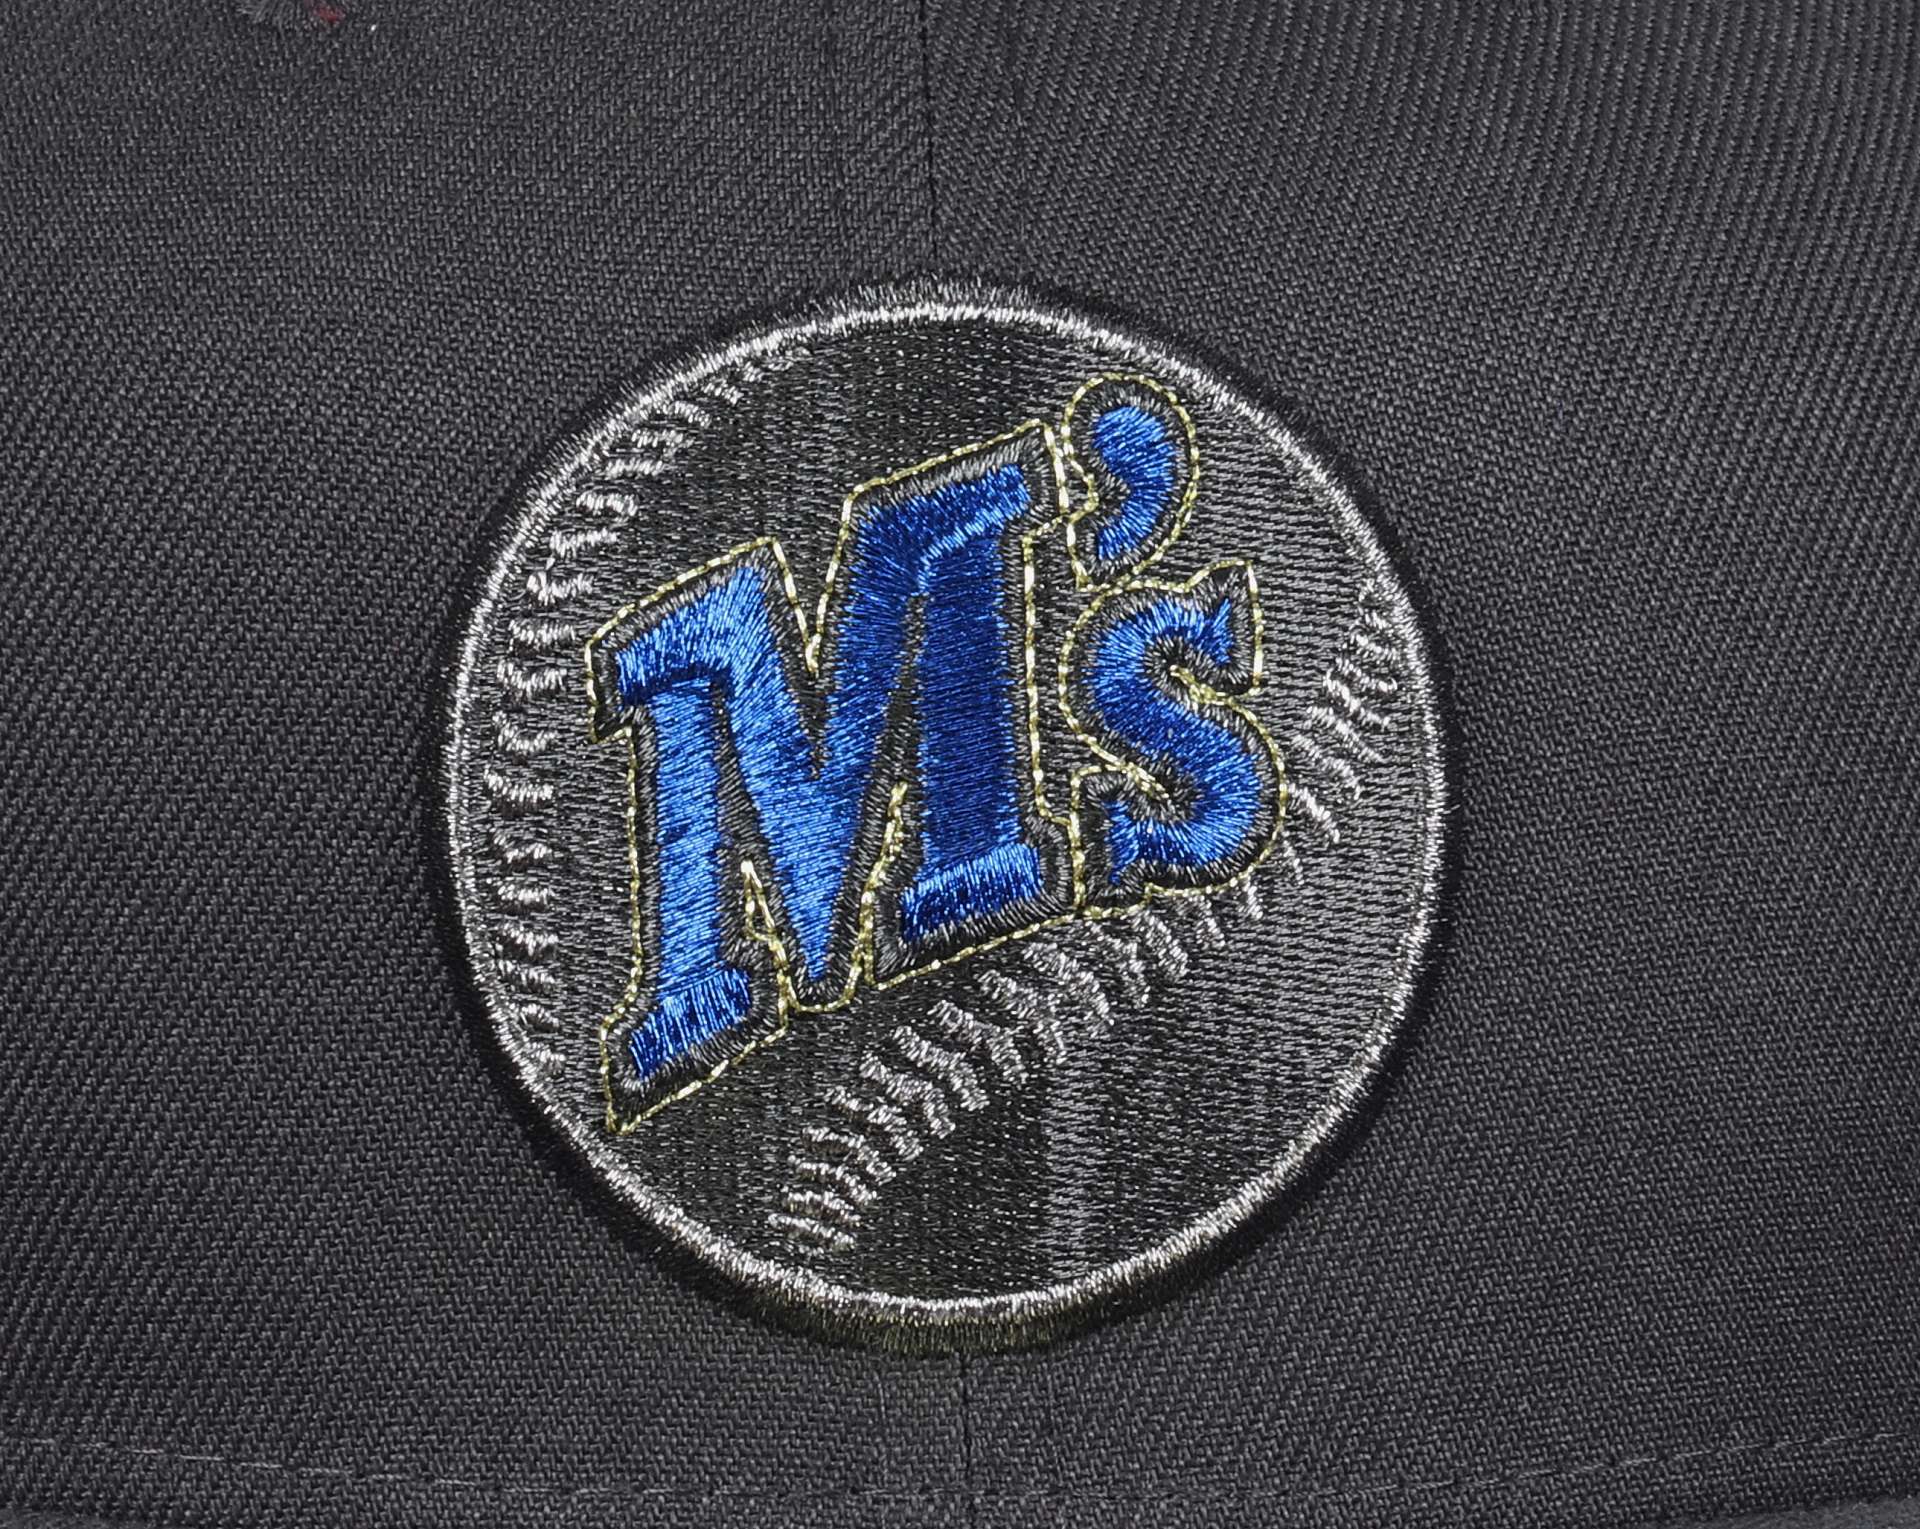 Seattle Mariners MLB Cooperstown 40th Anniversary Sidepatch Gray 59Fifty Basecap New Era